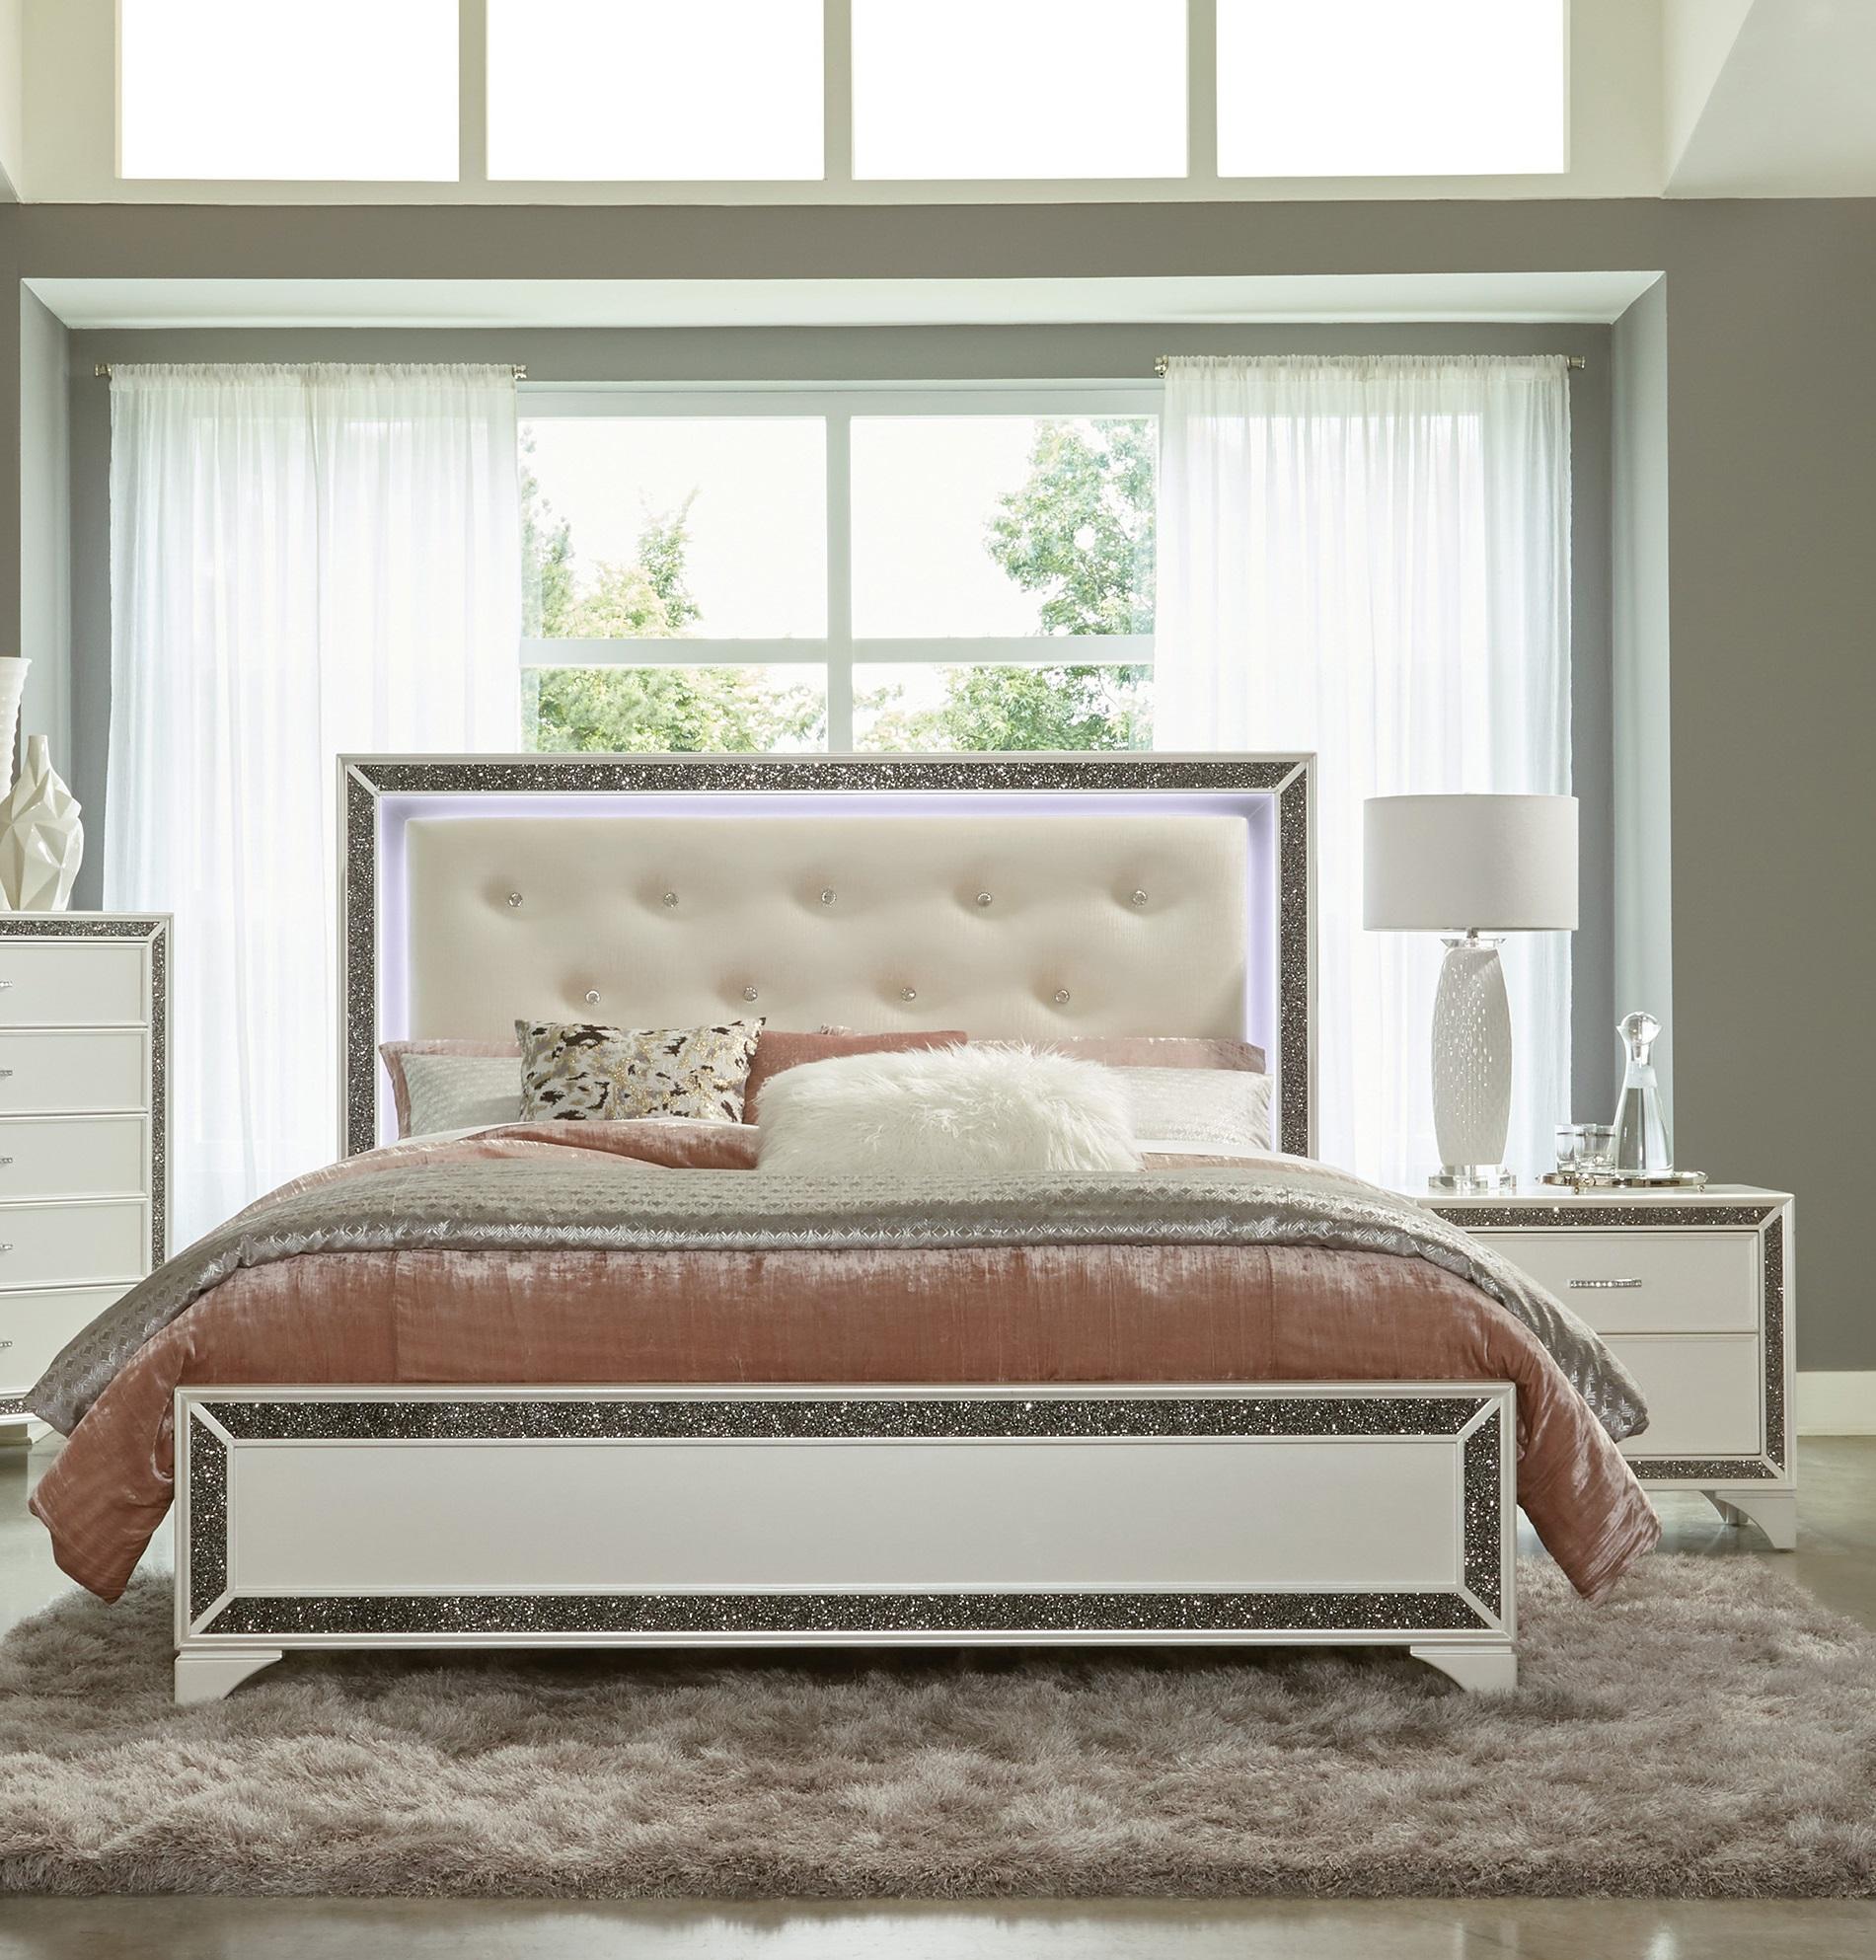 Modern Bedroom Set 1572WK-1CK-3PC Salon 1572WK-1CK-3PC in Pearl White Faux Leather